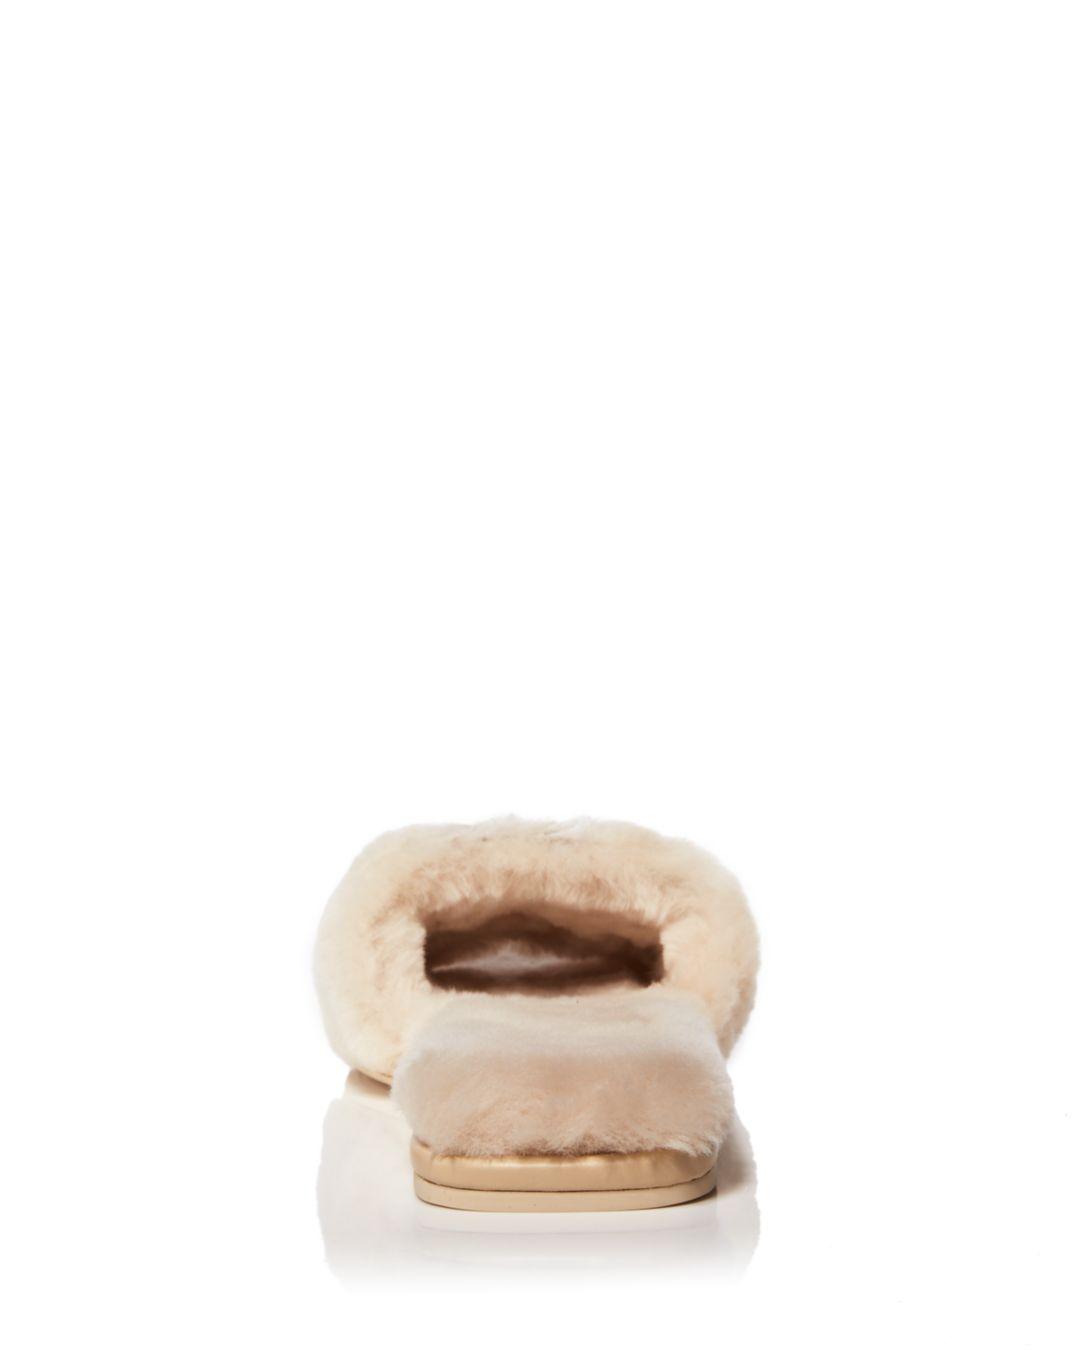 Tory Burch Double T Fluffy Slippers in Natural - Lyst